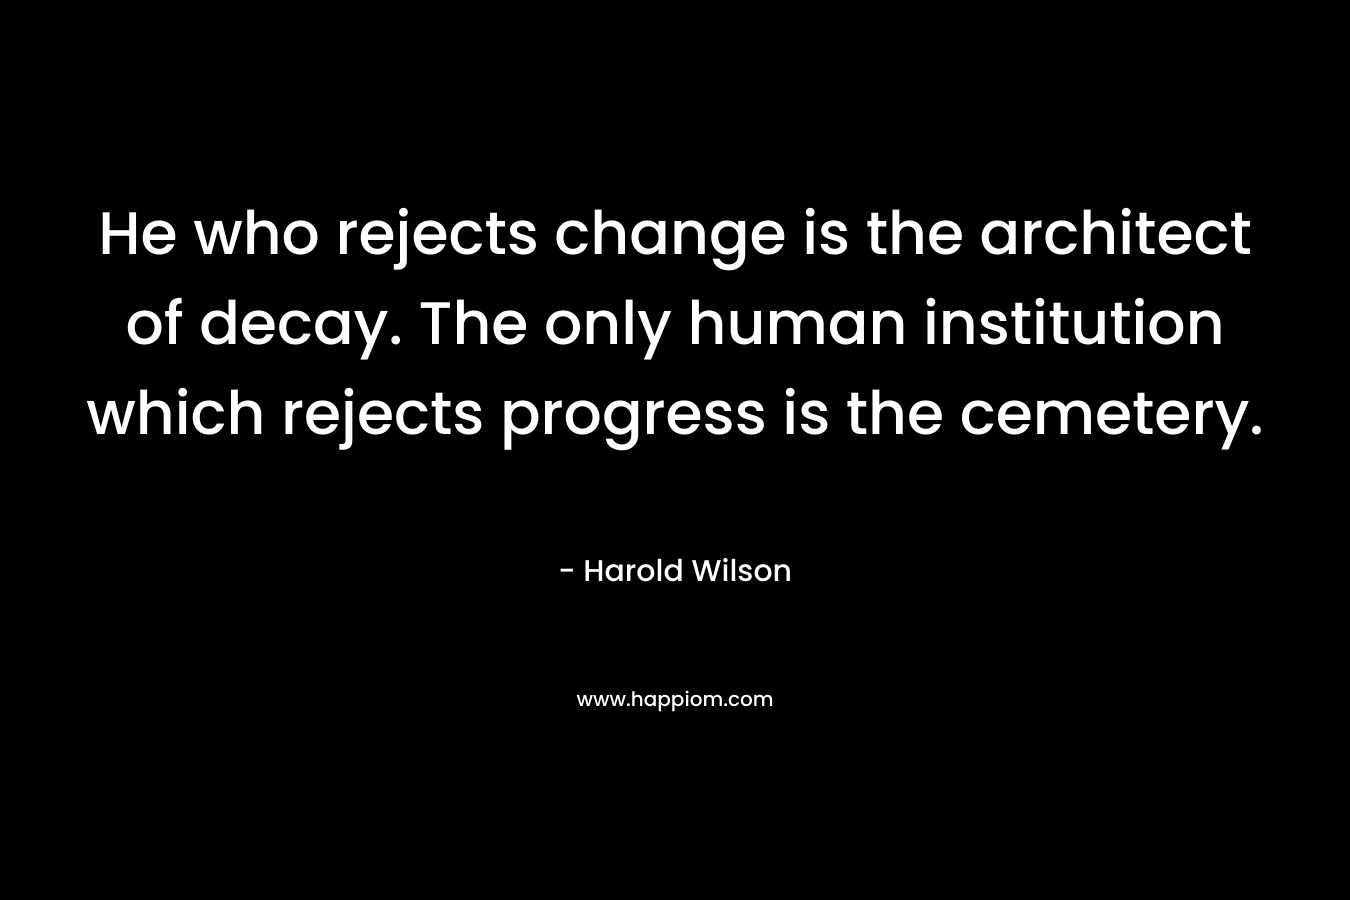 He who rejects change is the architect of decay. The only human institution which rejects progress is the cemetery.